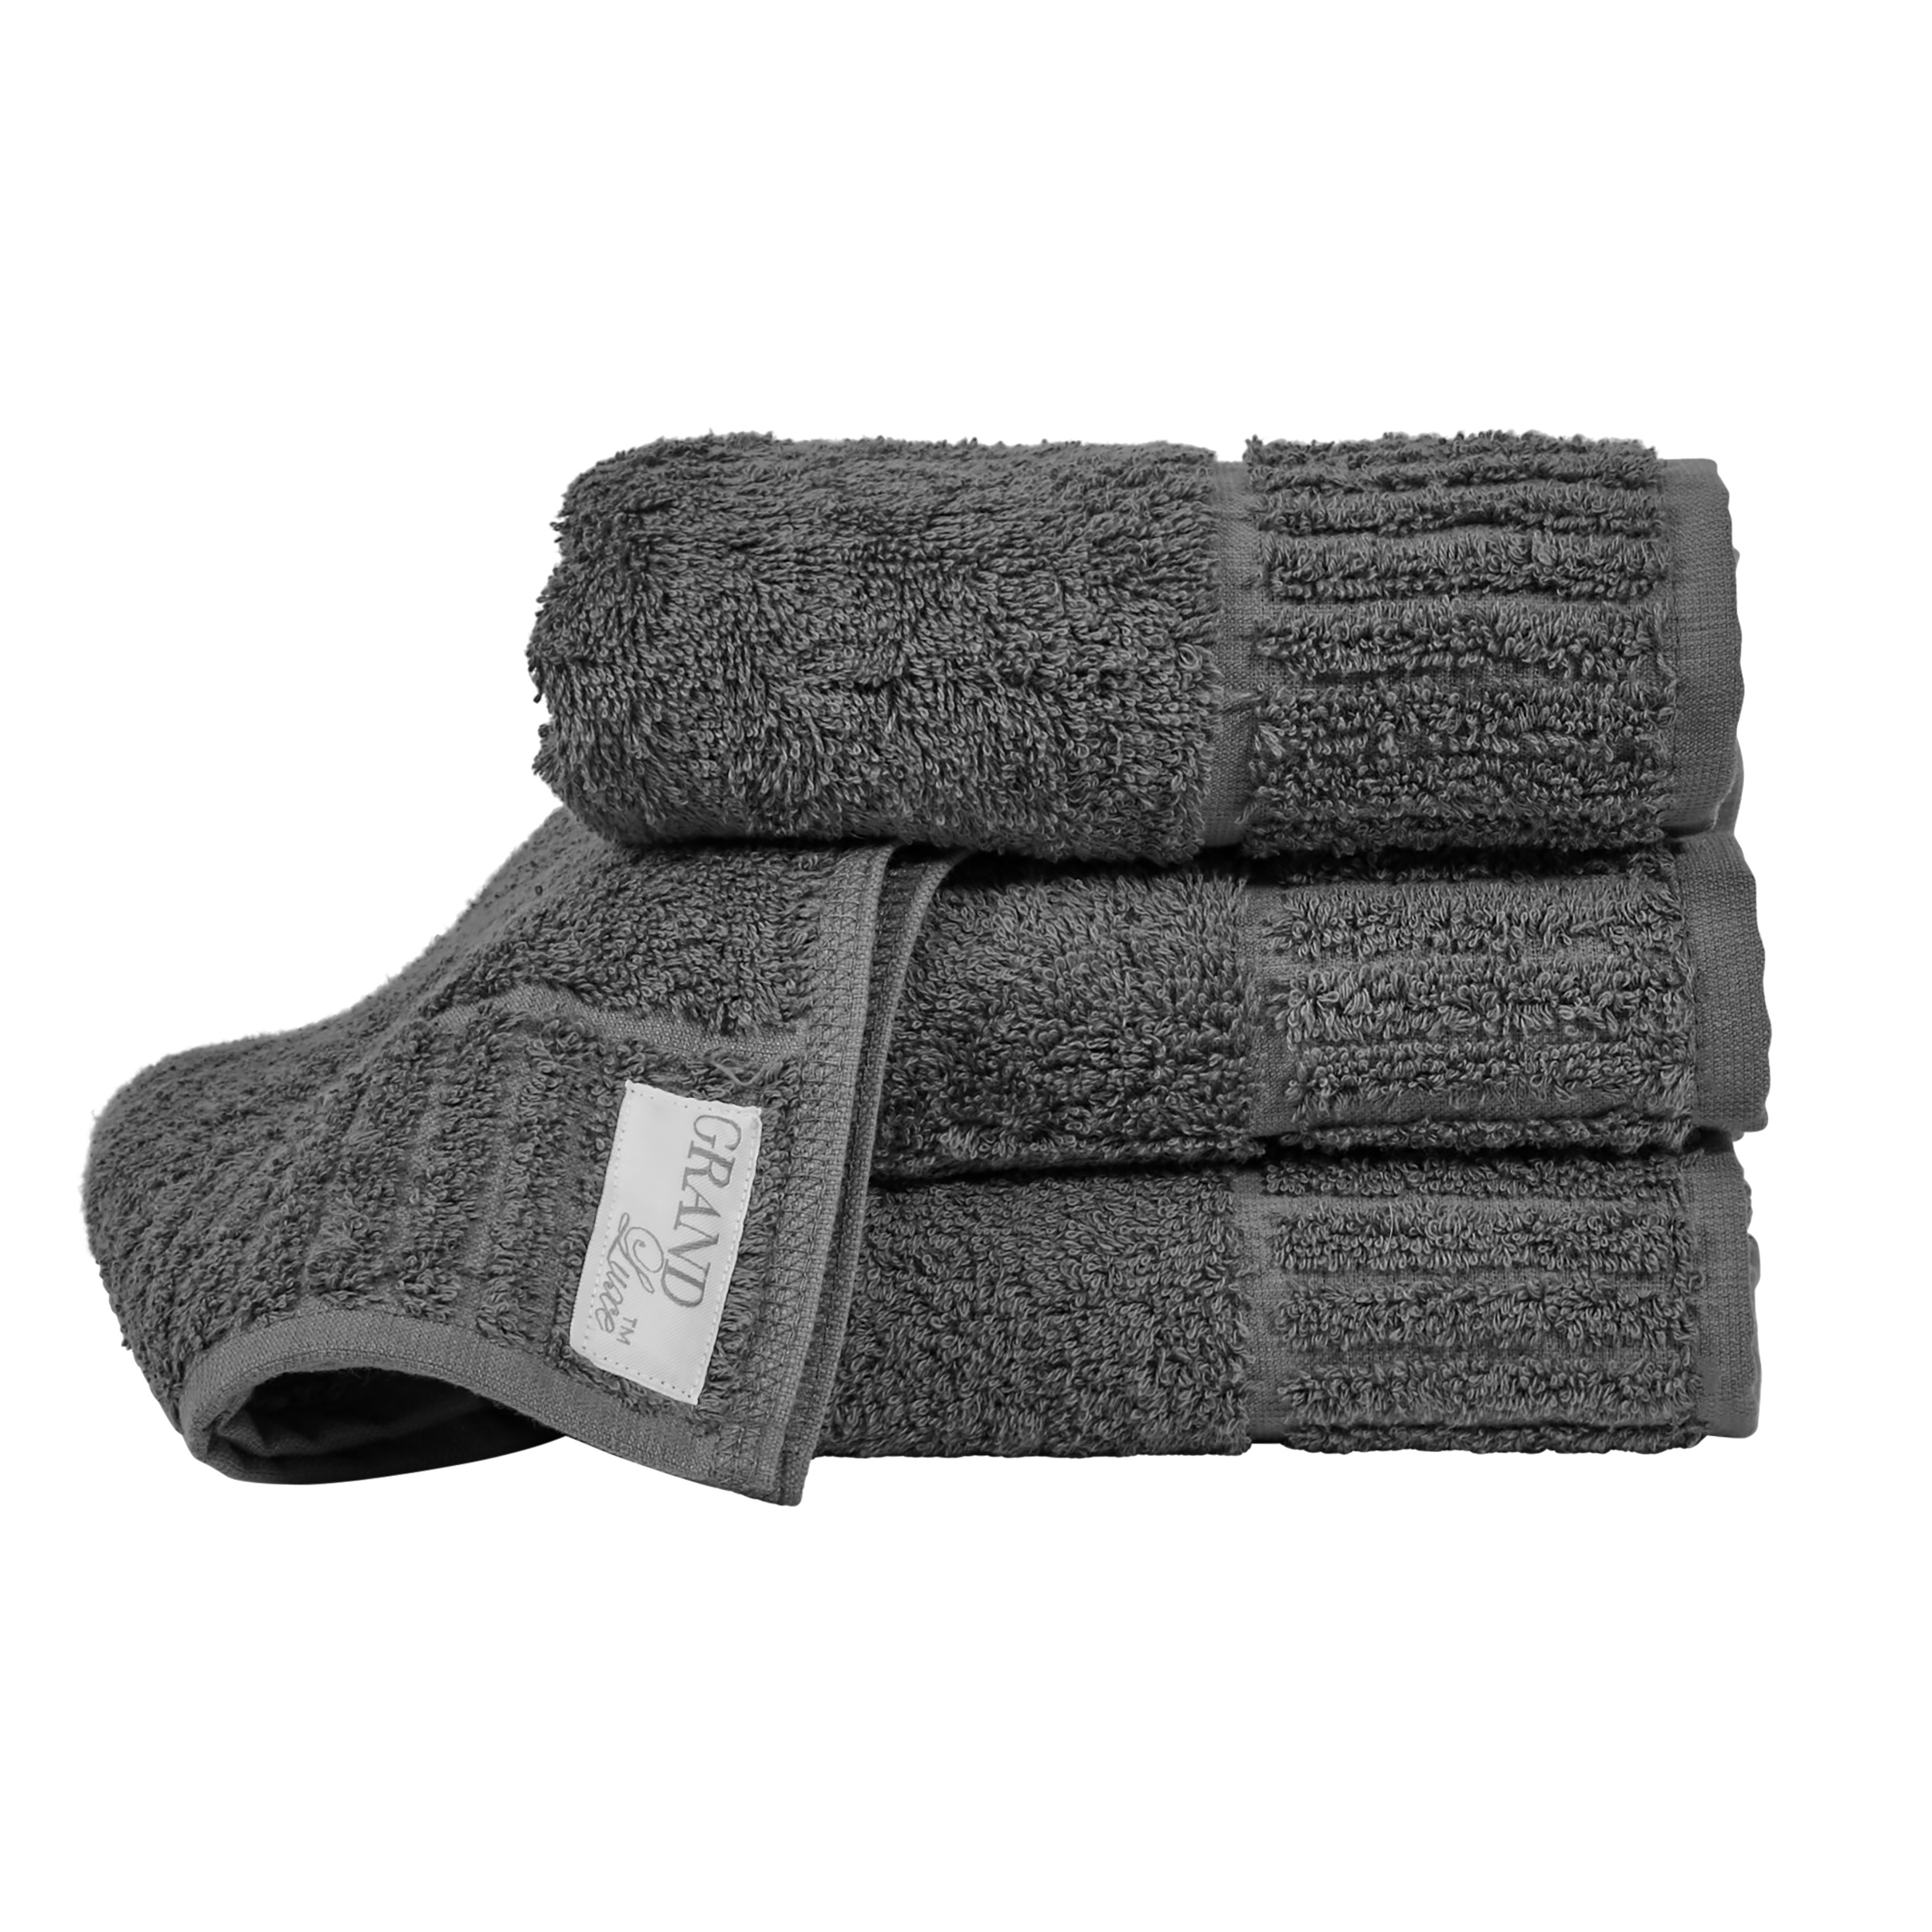 Towel Grand Luxe Cashmere Gray 50x70 cm 500 g